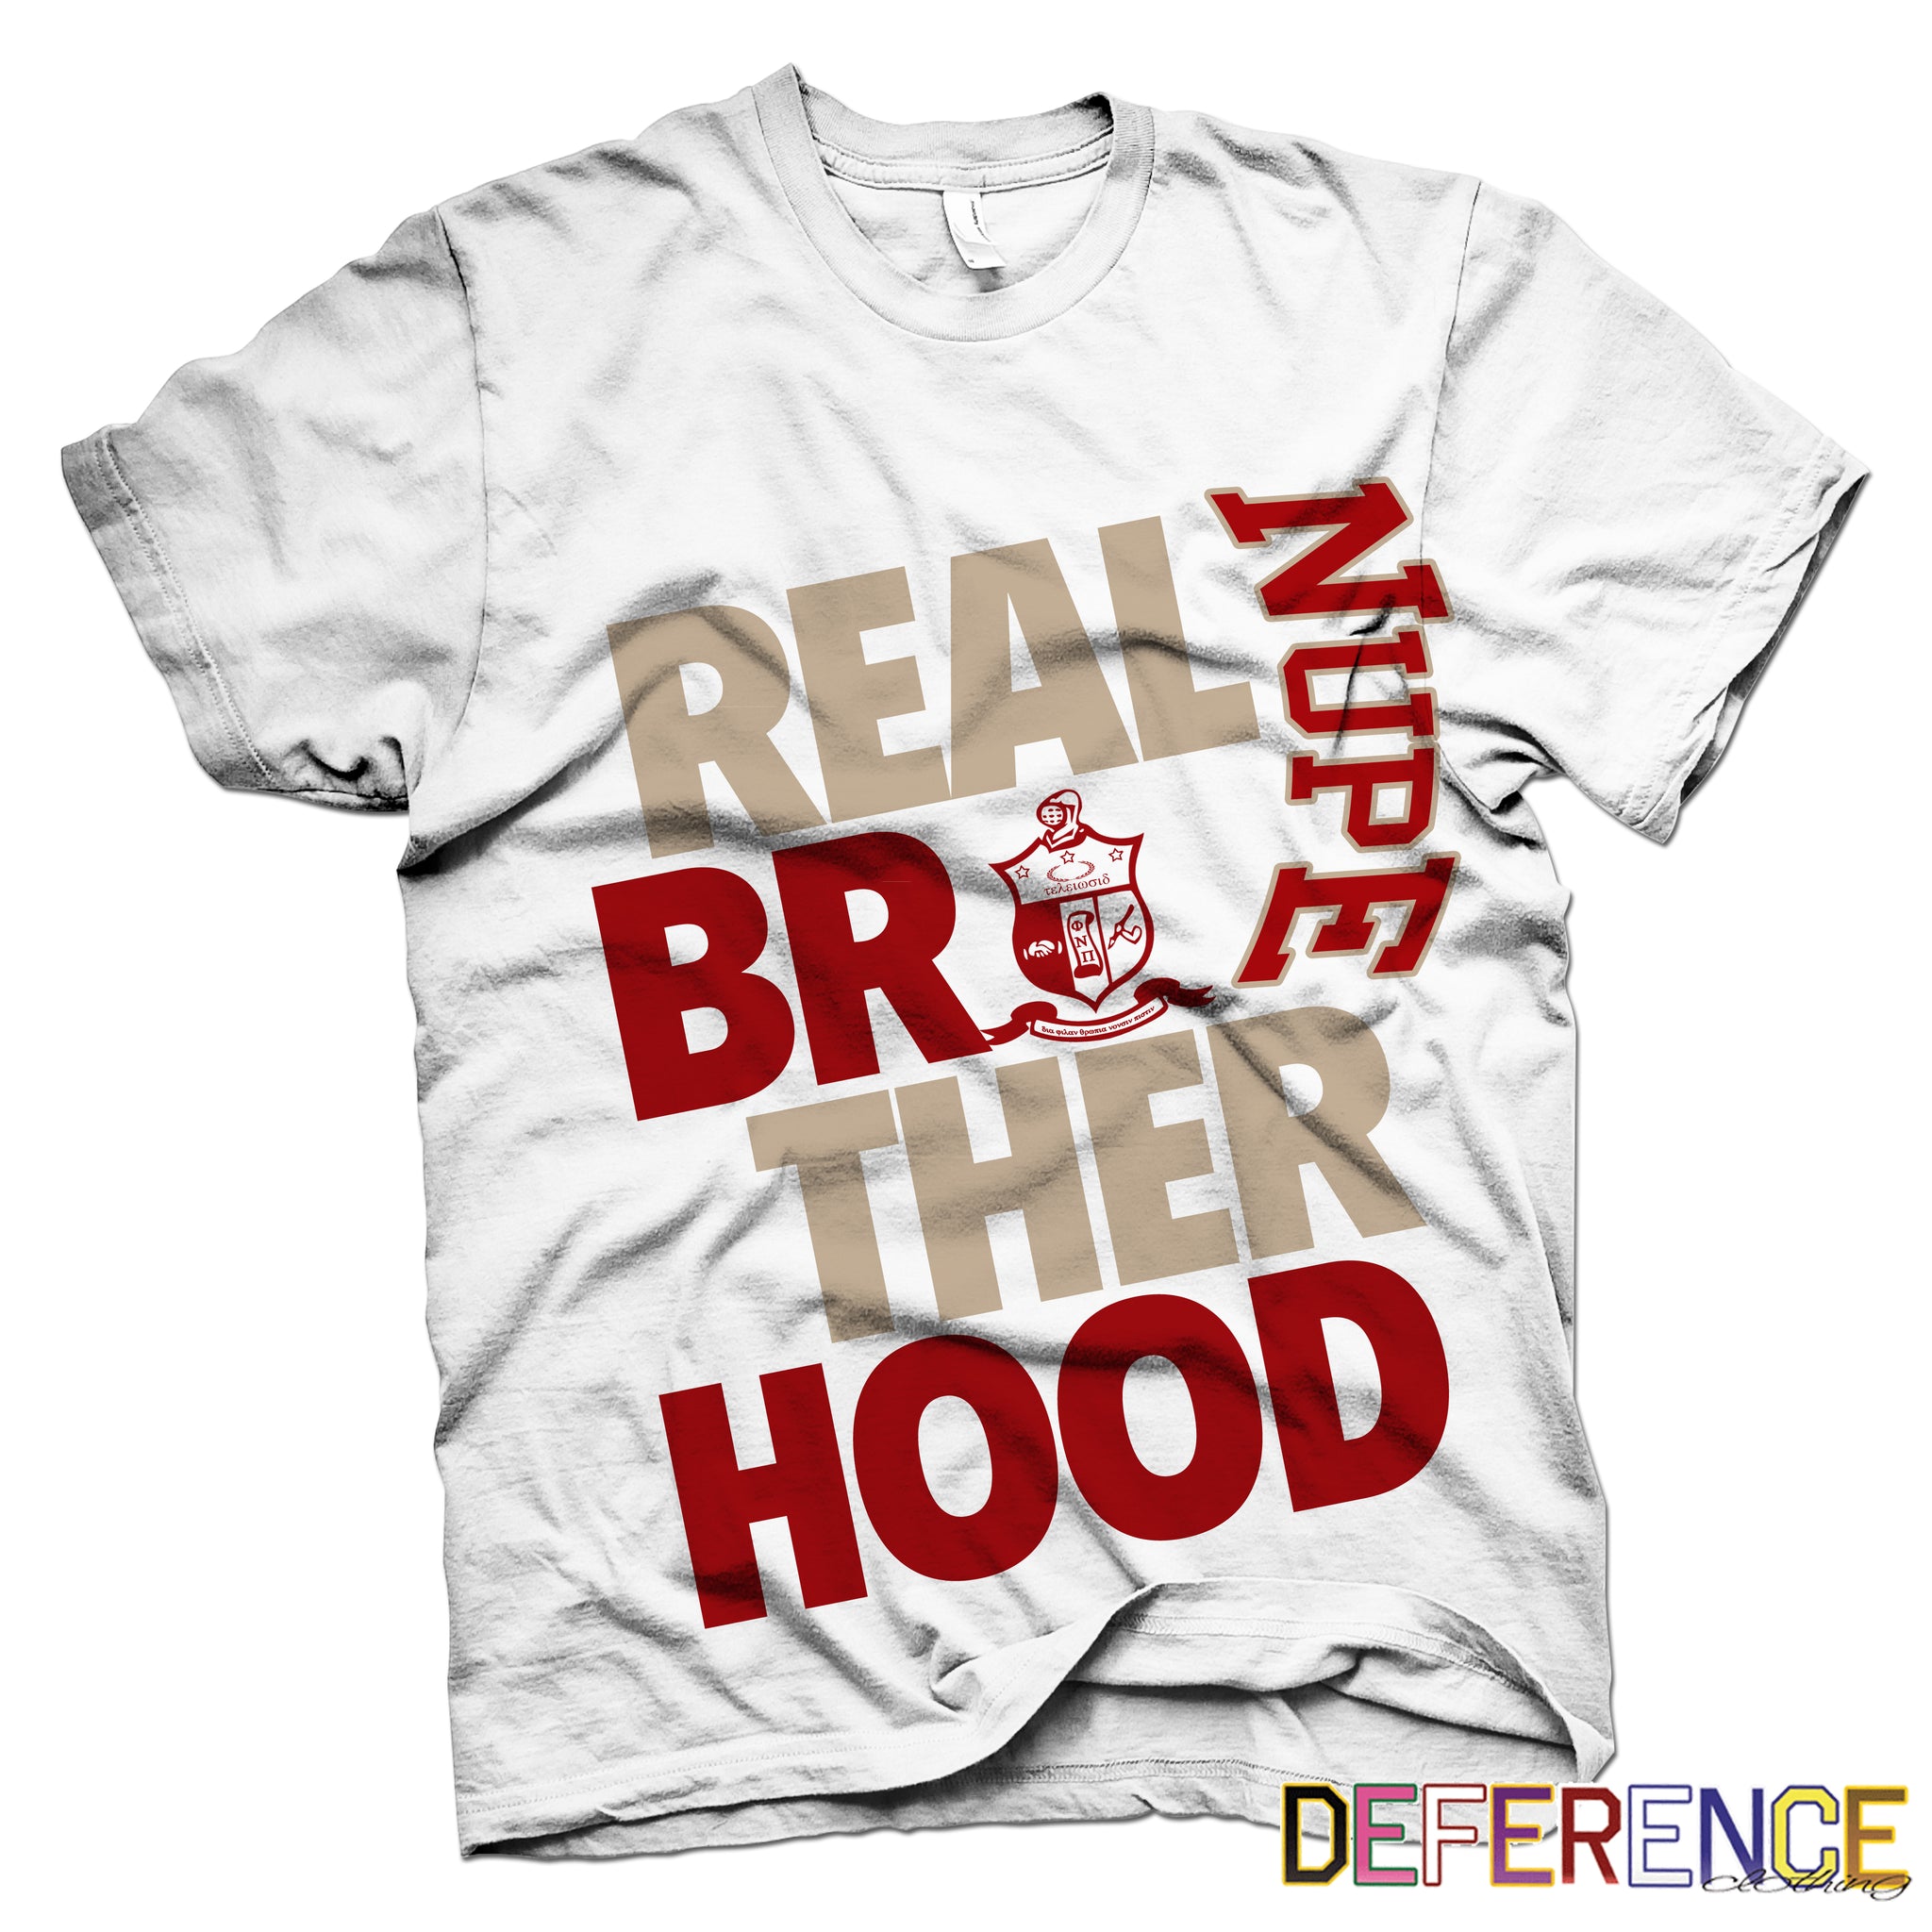 deference clothing